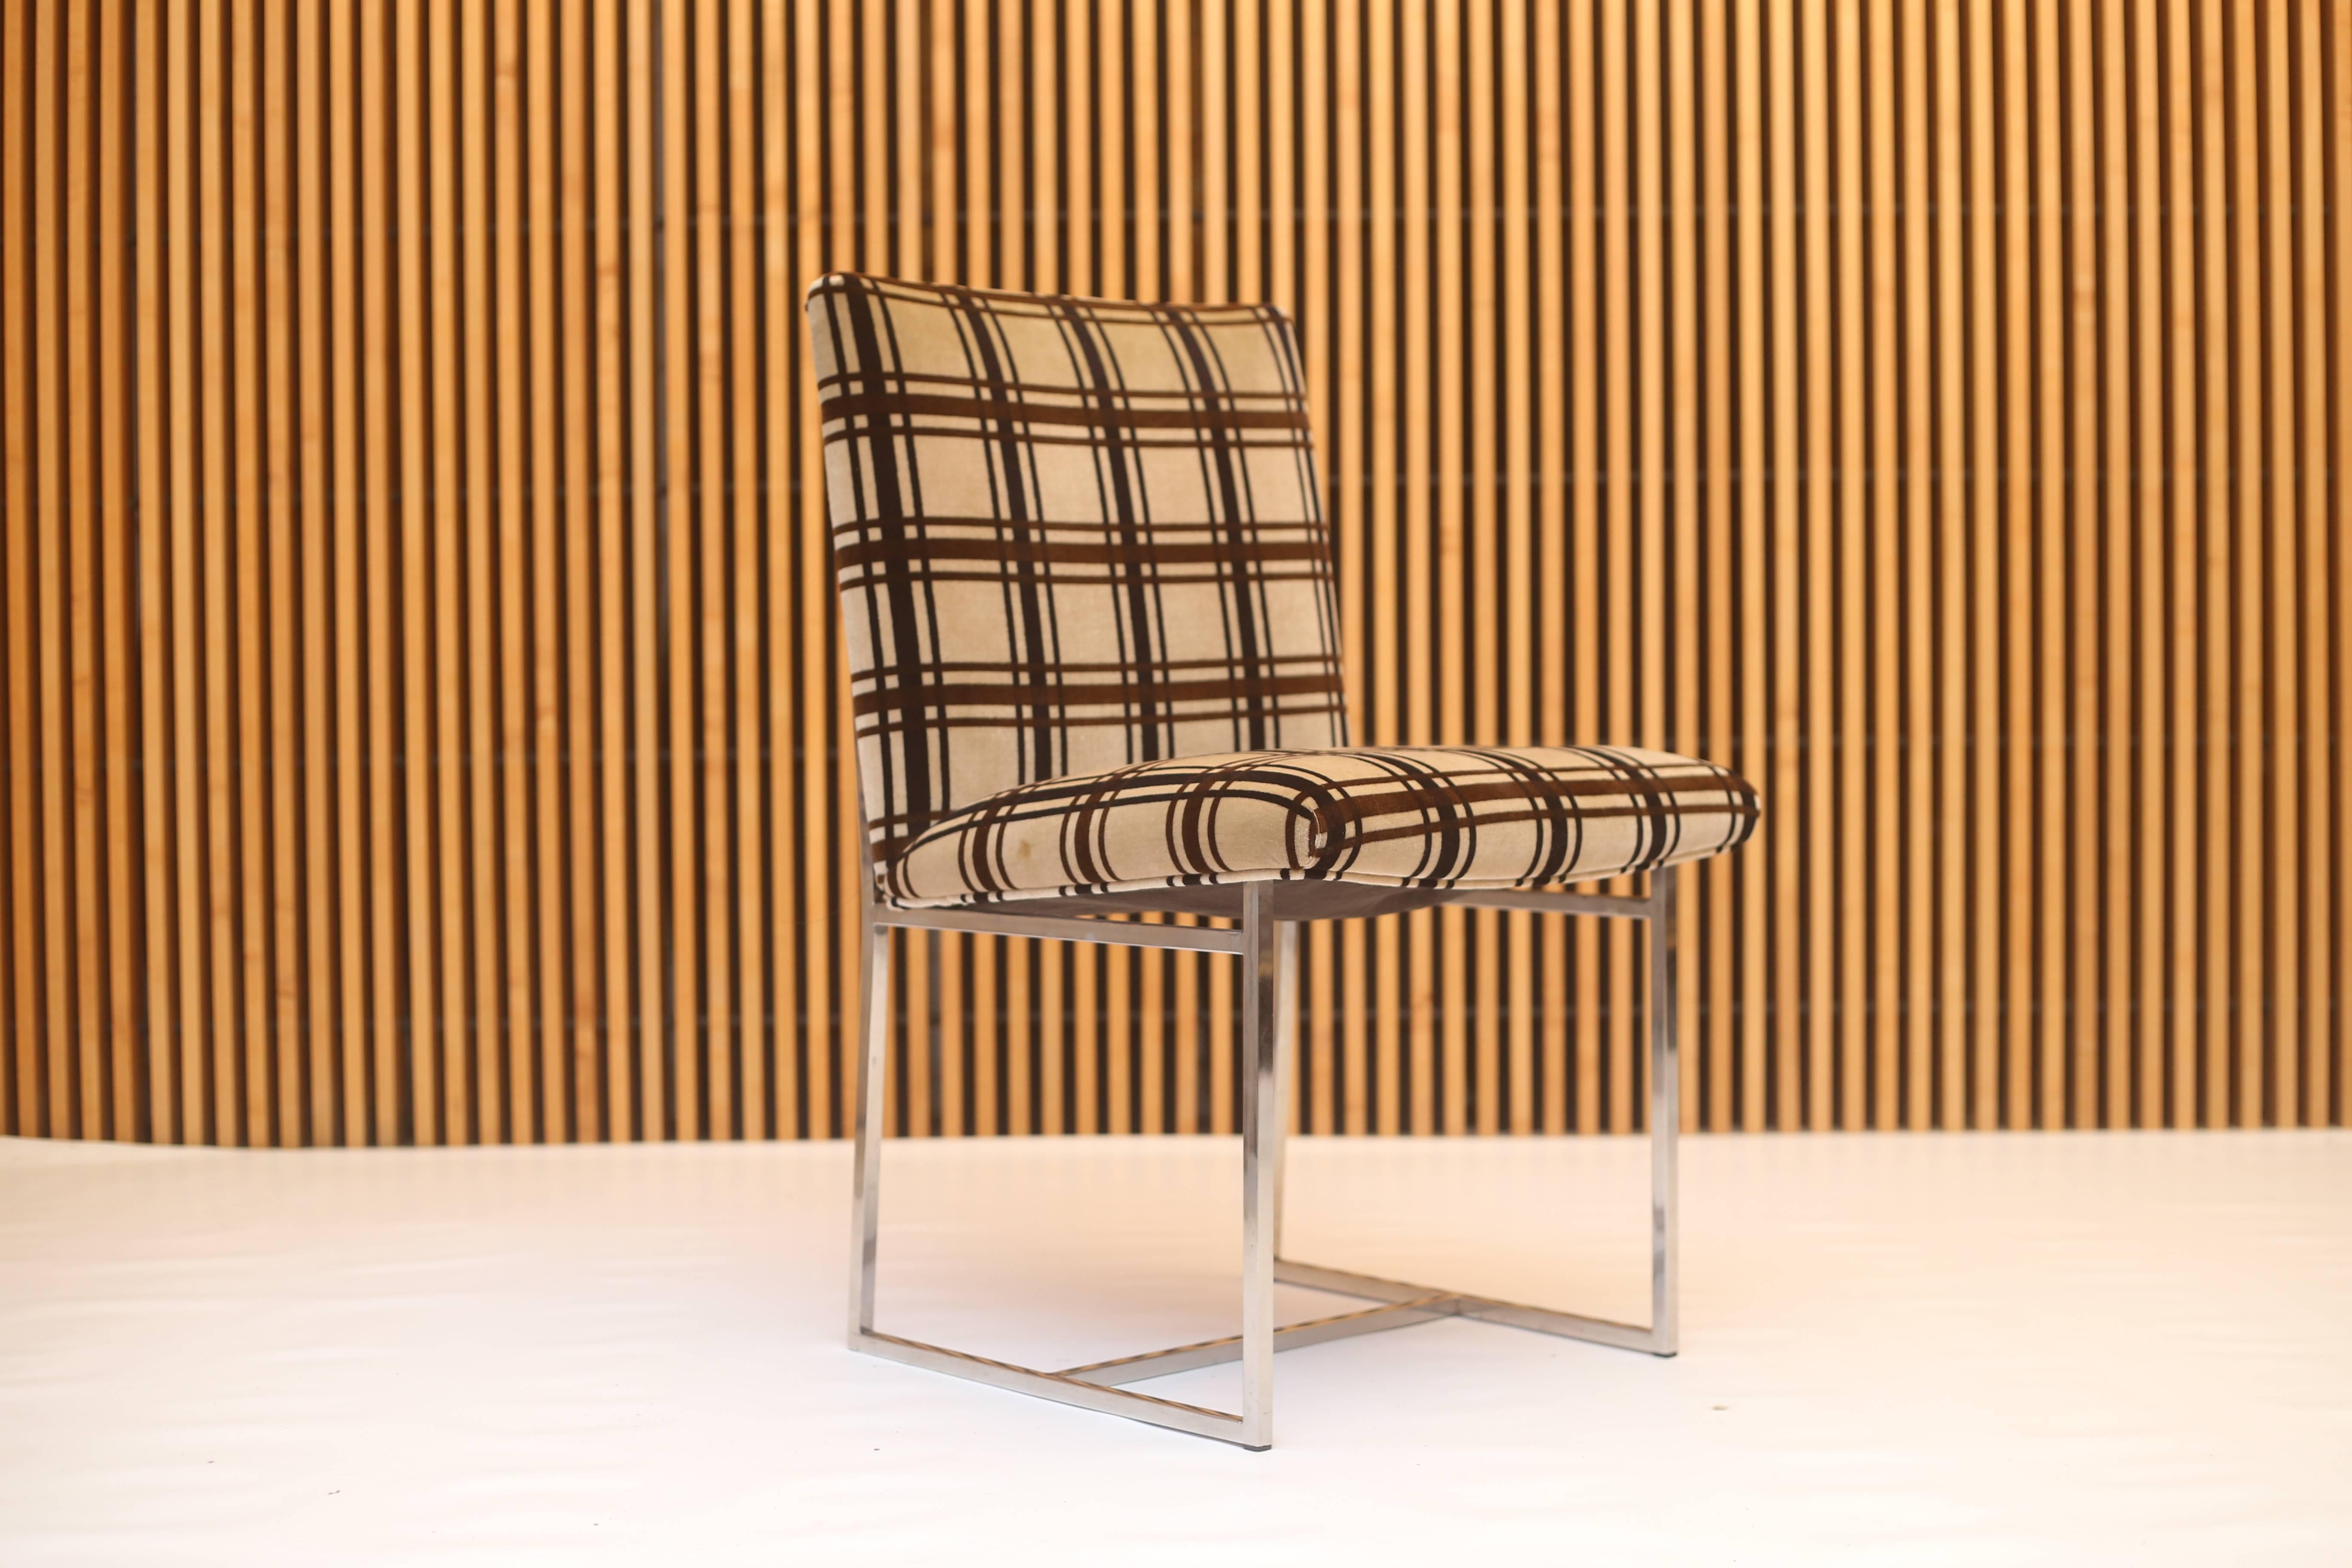 A set of six high style Mid-Century Modern dining chairs in the style of Milo Baughman. Vintage with original plaid upholstery reminiscent of Jack Lenor Larsen fabric in a brown beige colorway. 

Dimensions:
Seat height 17